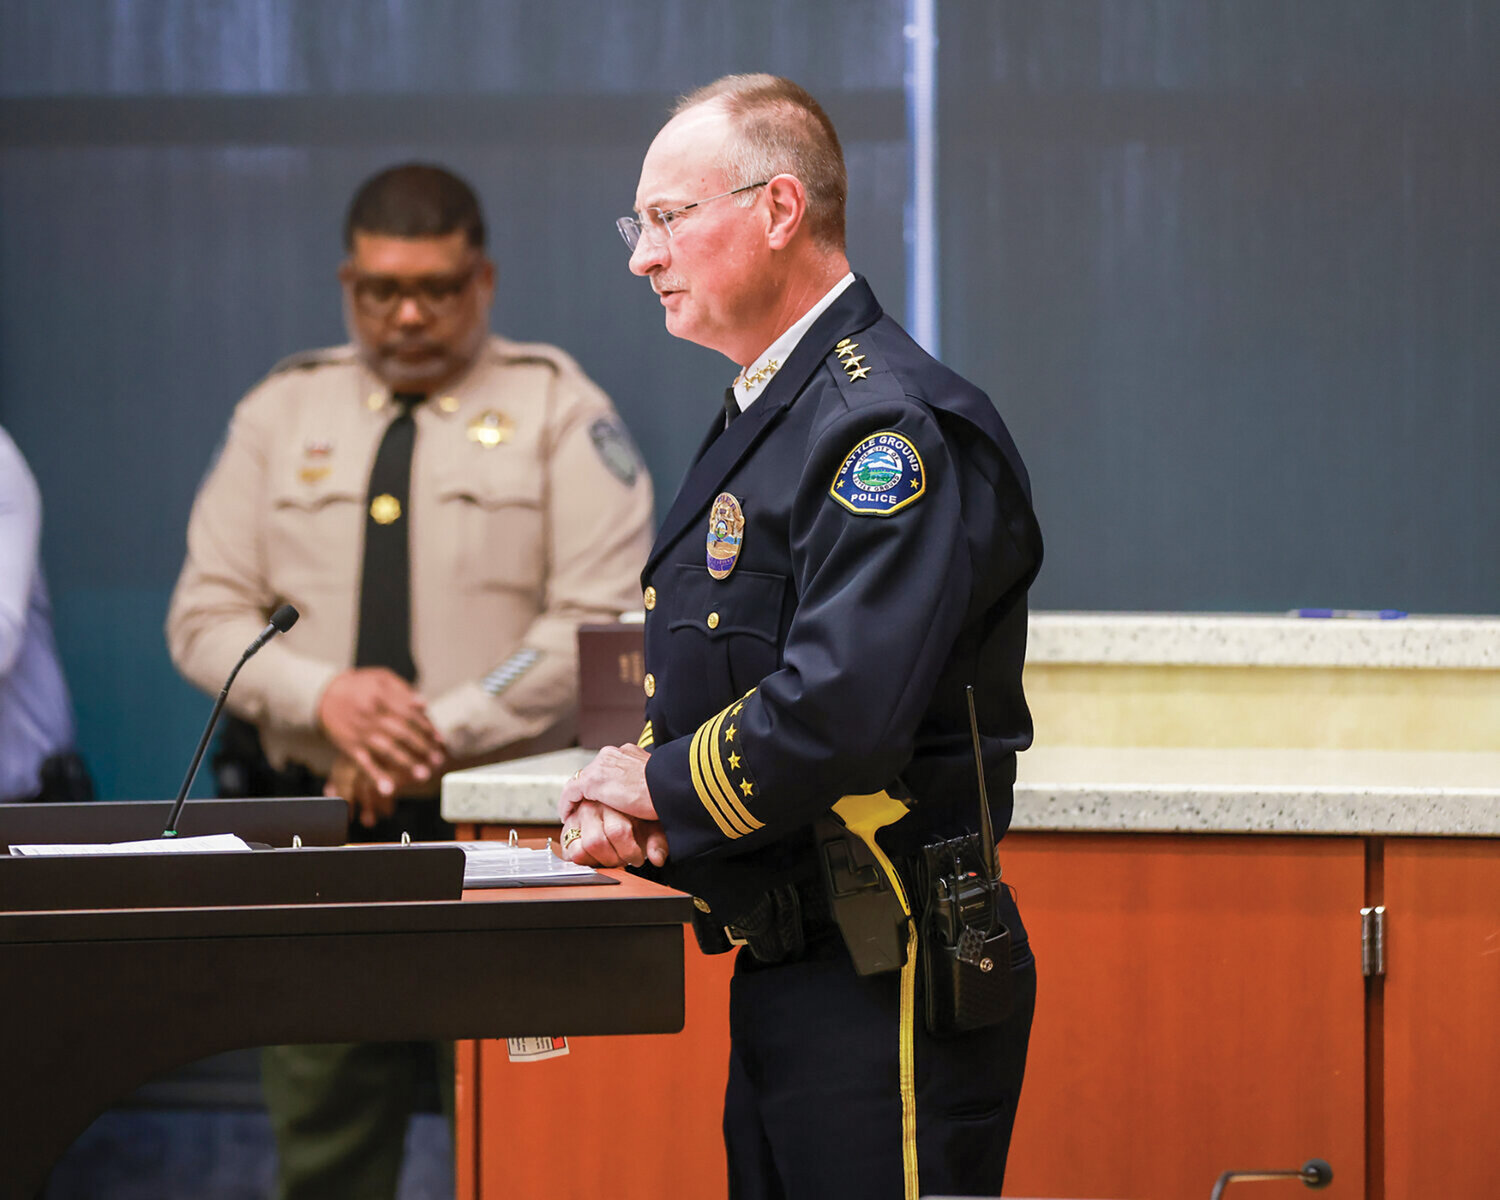 Battle Ground Police Chief Mike Fort reads the "roll call of honor" during the Clark County Law Enforcement Memorial Ceremony at the Public Service Center in Vancouver on Thursday, May 18.